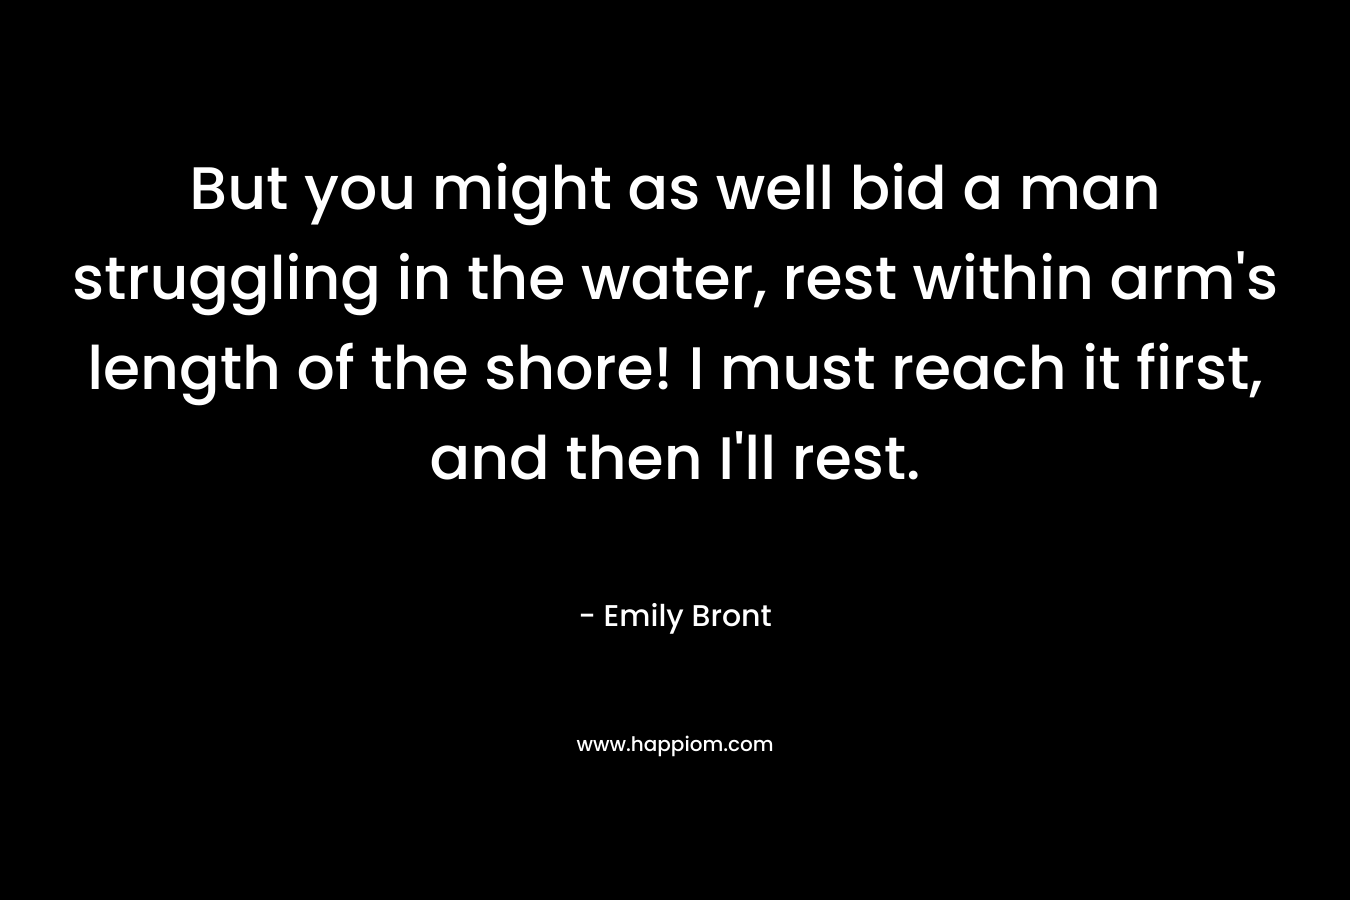 But you might as well bid a man struggling in the water, rest within arm’s length of the shore! I must reach it first, and then I’ll rest. – Emily Bront